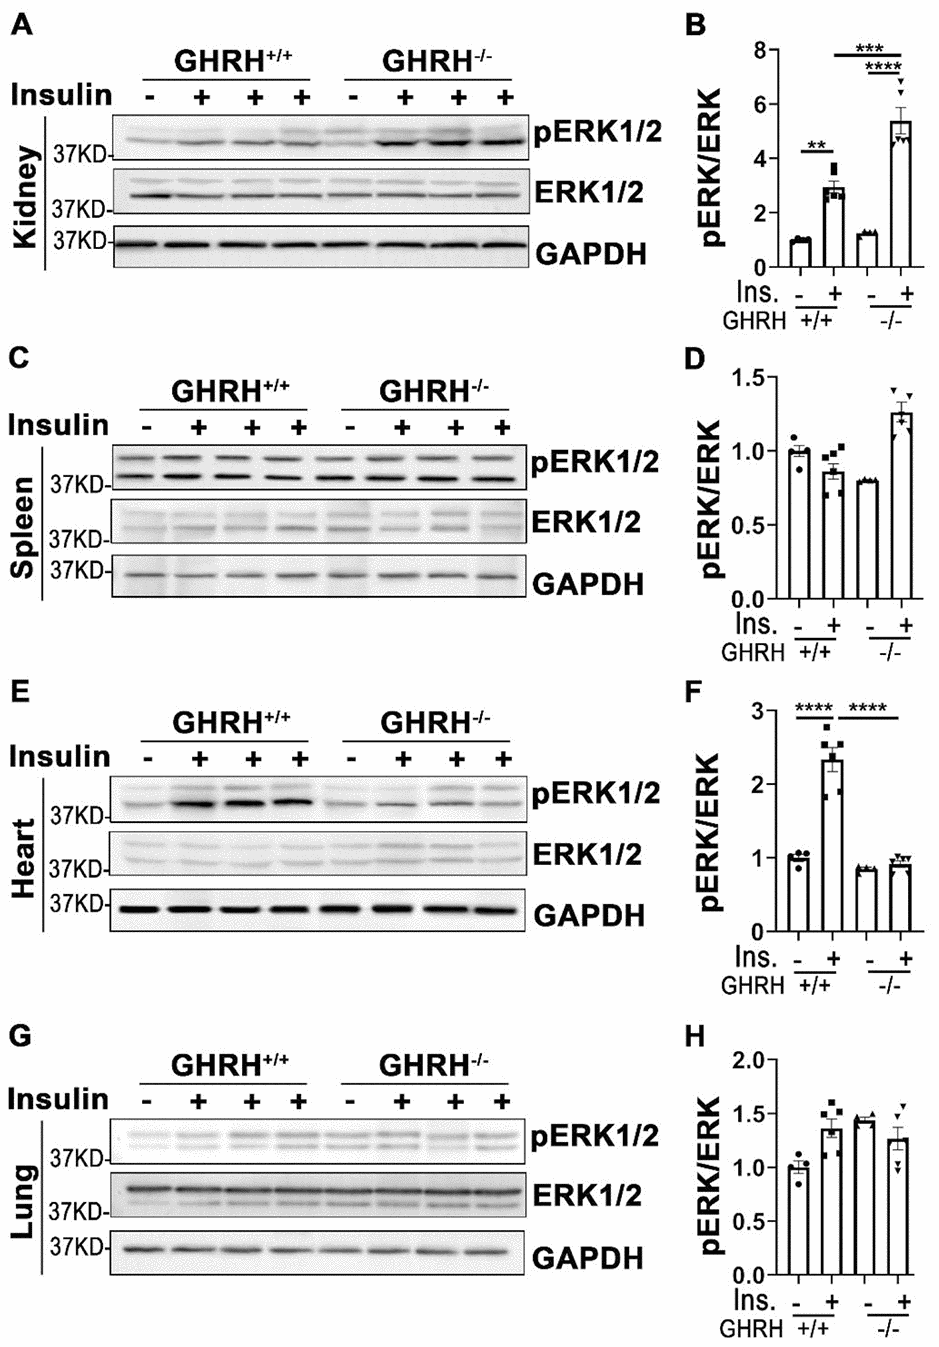 Tissue-specific phosphorylation of ERK1/2 by insulin stimulation in GHRH-/- mice. (A, B) Activation of ERK1/2 in kidney. (C, D) Activation of ERK1/2 in spleen. (E, F) Activation of ERK1/2 in heart. (G, H) Activation of ERK1/2 in lung. The 4 hours fasted mice were injected i.p. with porcine insulin (1 IU/kg of body weight). After 20 min, tissues were collected to perform western blots. All data (means ± sem) were expressed as fold change compared to vehicle treated WT controls (defined as 1.0) (n=4 for WT group; n=6 for GHRH-/- mice). Statistical analysis was performed by unpaired Student’s t-test, ** P P P 